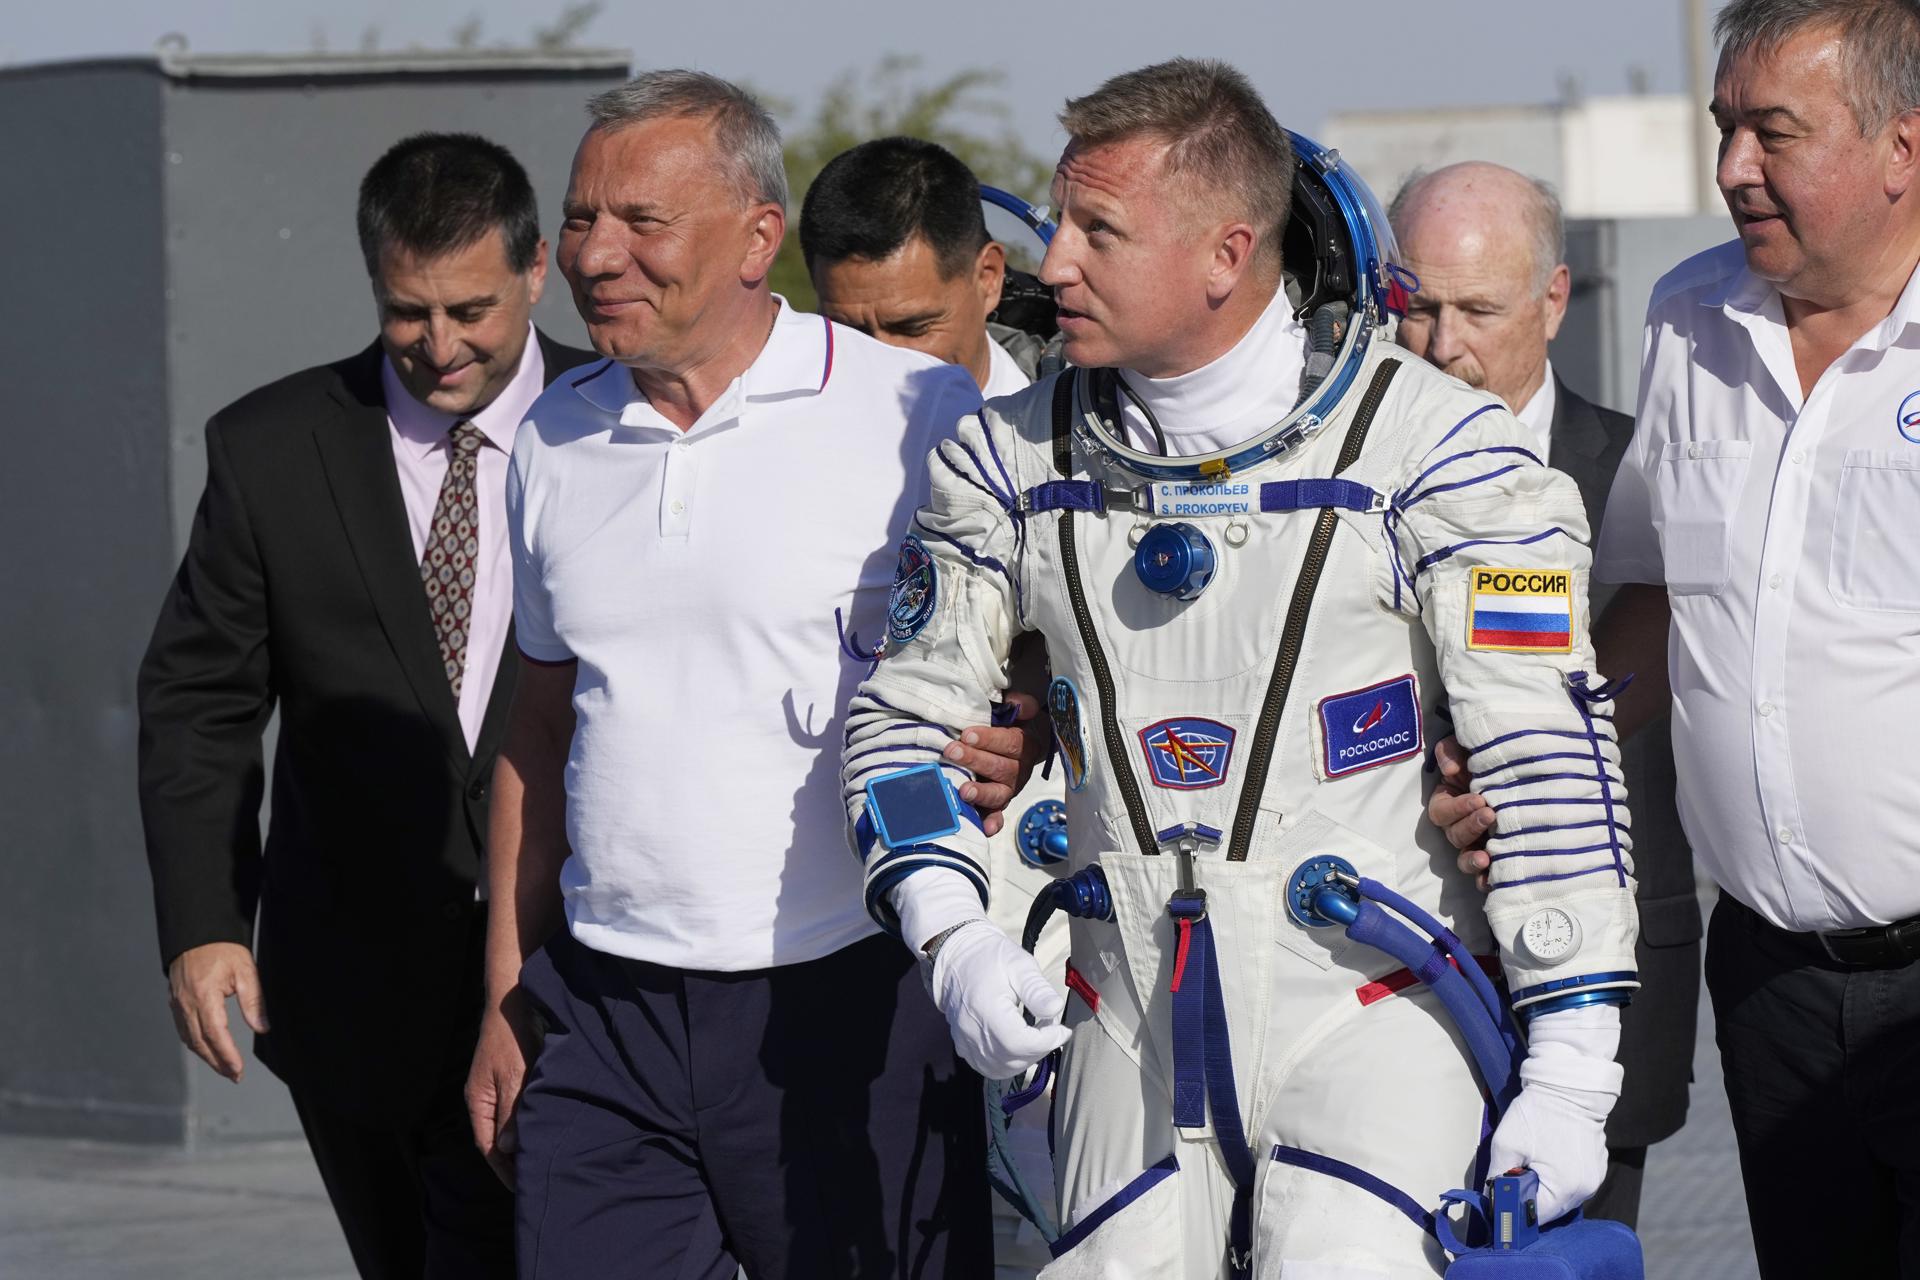 Roscosmos cosmonaut Sergey Prokopyev (C), crew member of the mission to the International Space Station (ISS) walks to the rocket accompanied by head of Roscosmos space agency Yuri Borisov (2-L) prior the launch of Soyuz-2.1 rocket at the Russian leased Baikonur cosmodrome, Kazakhstan, 21 September 2022. EFE-EPA/DMITRI LOVETSKY/POOL/FILE
